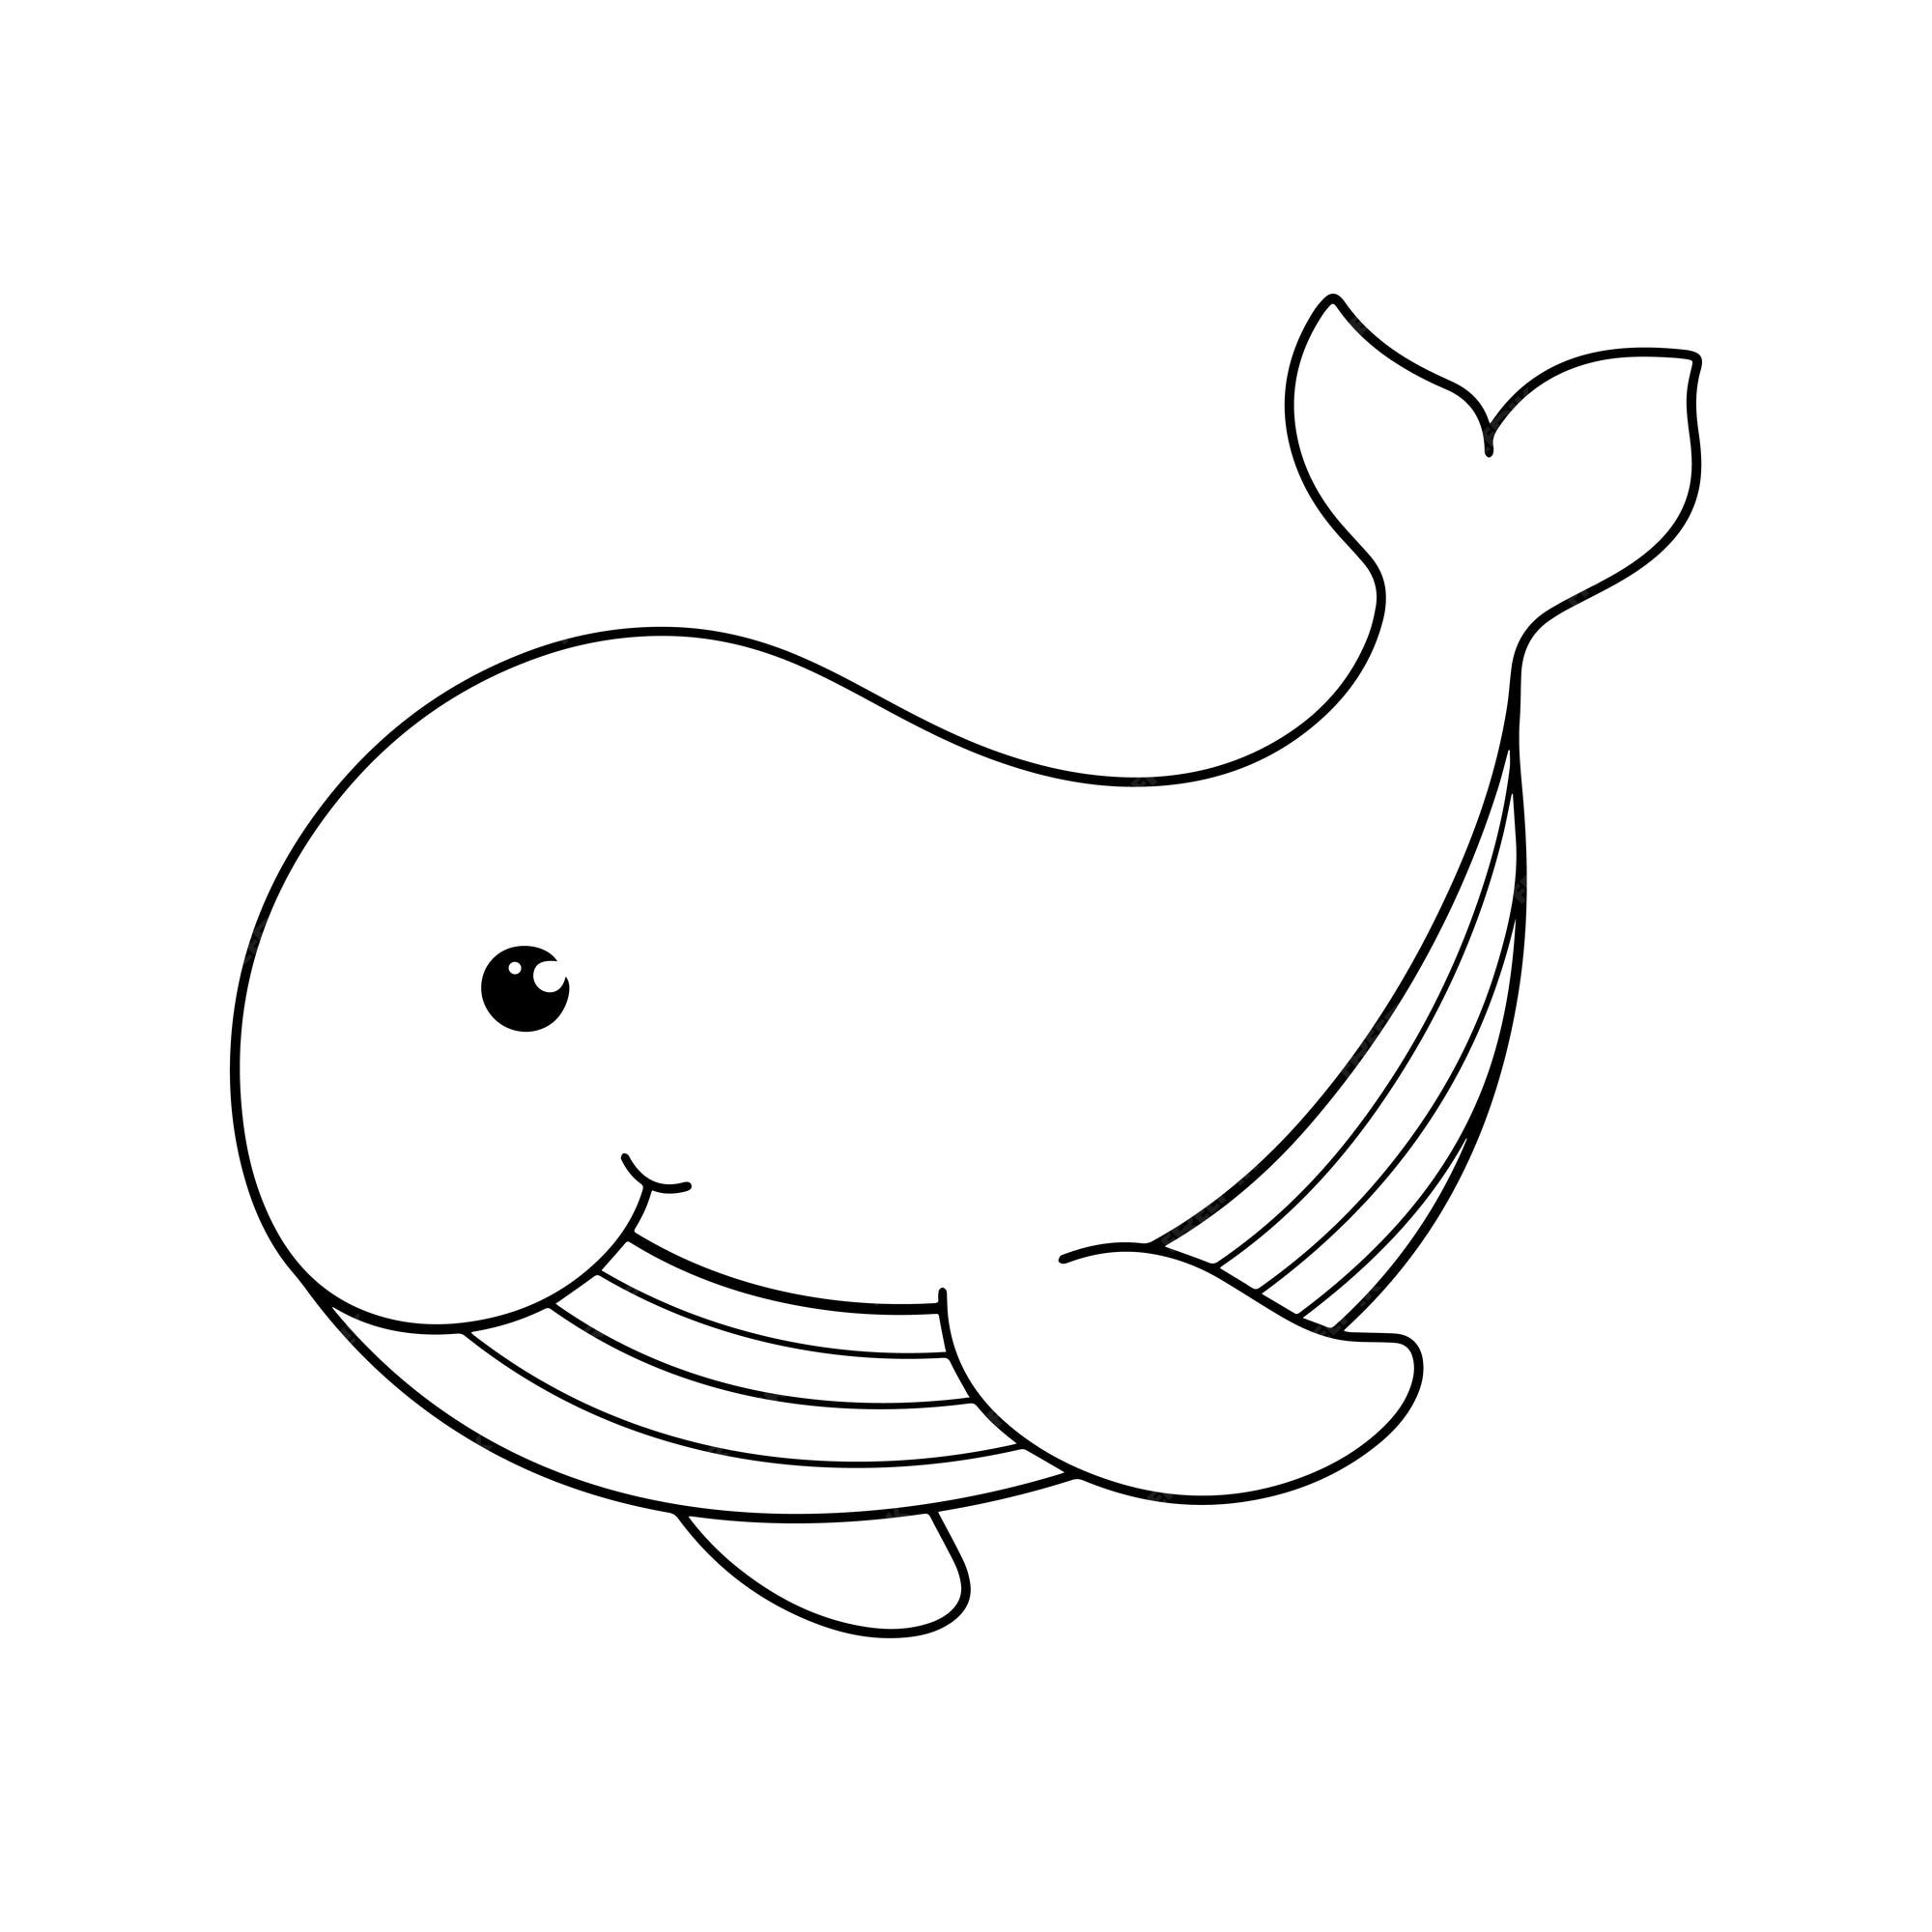 Premium vector whale coloring page colored illustration cartoon whale character for children coloring and scrap